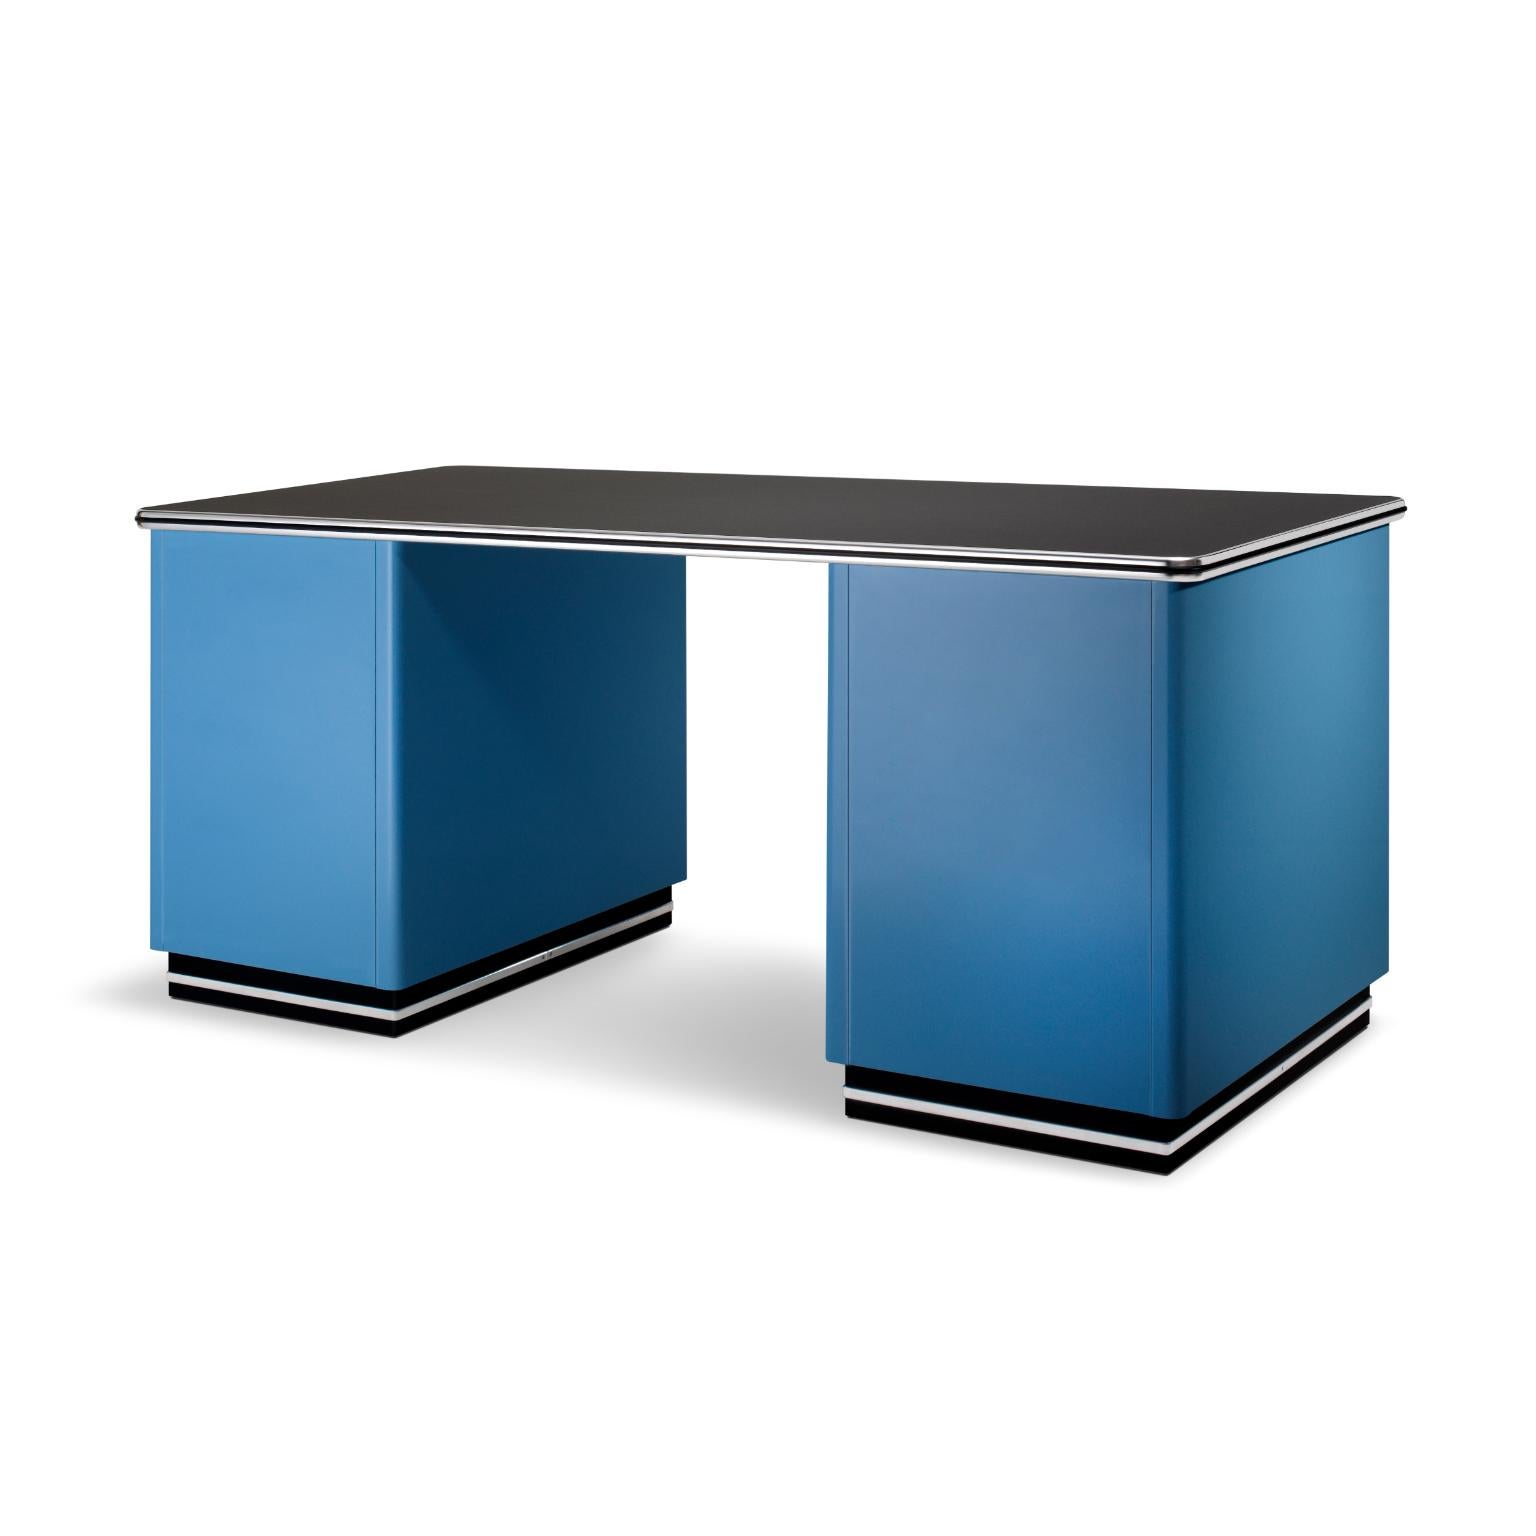 Executive metal desk in classical industrial design style. The timeless essential form with two cests of drawers, creates a clear and distinctive worksplace, adapted for different interior situations. The desktop can be covered on choice with